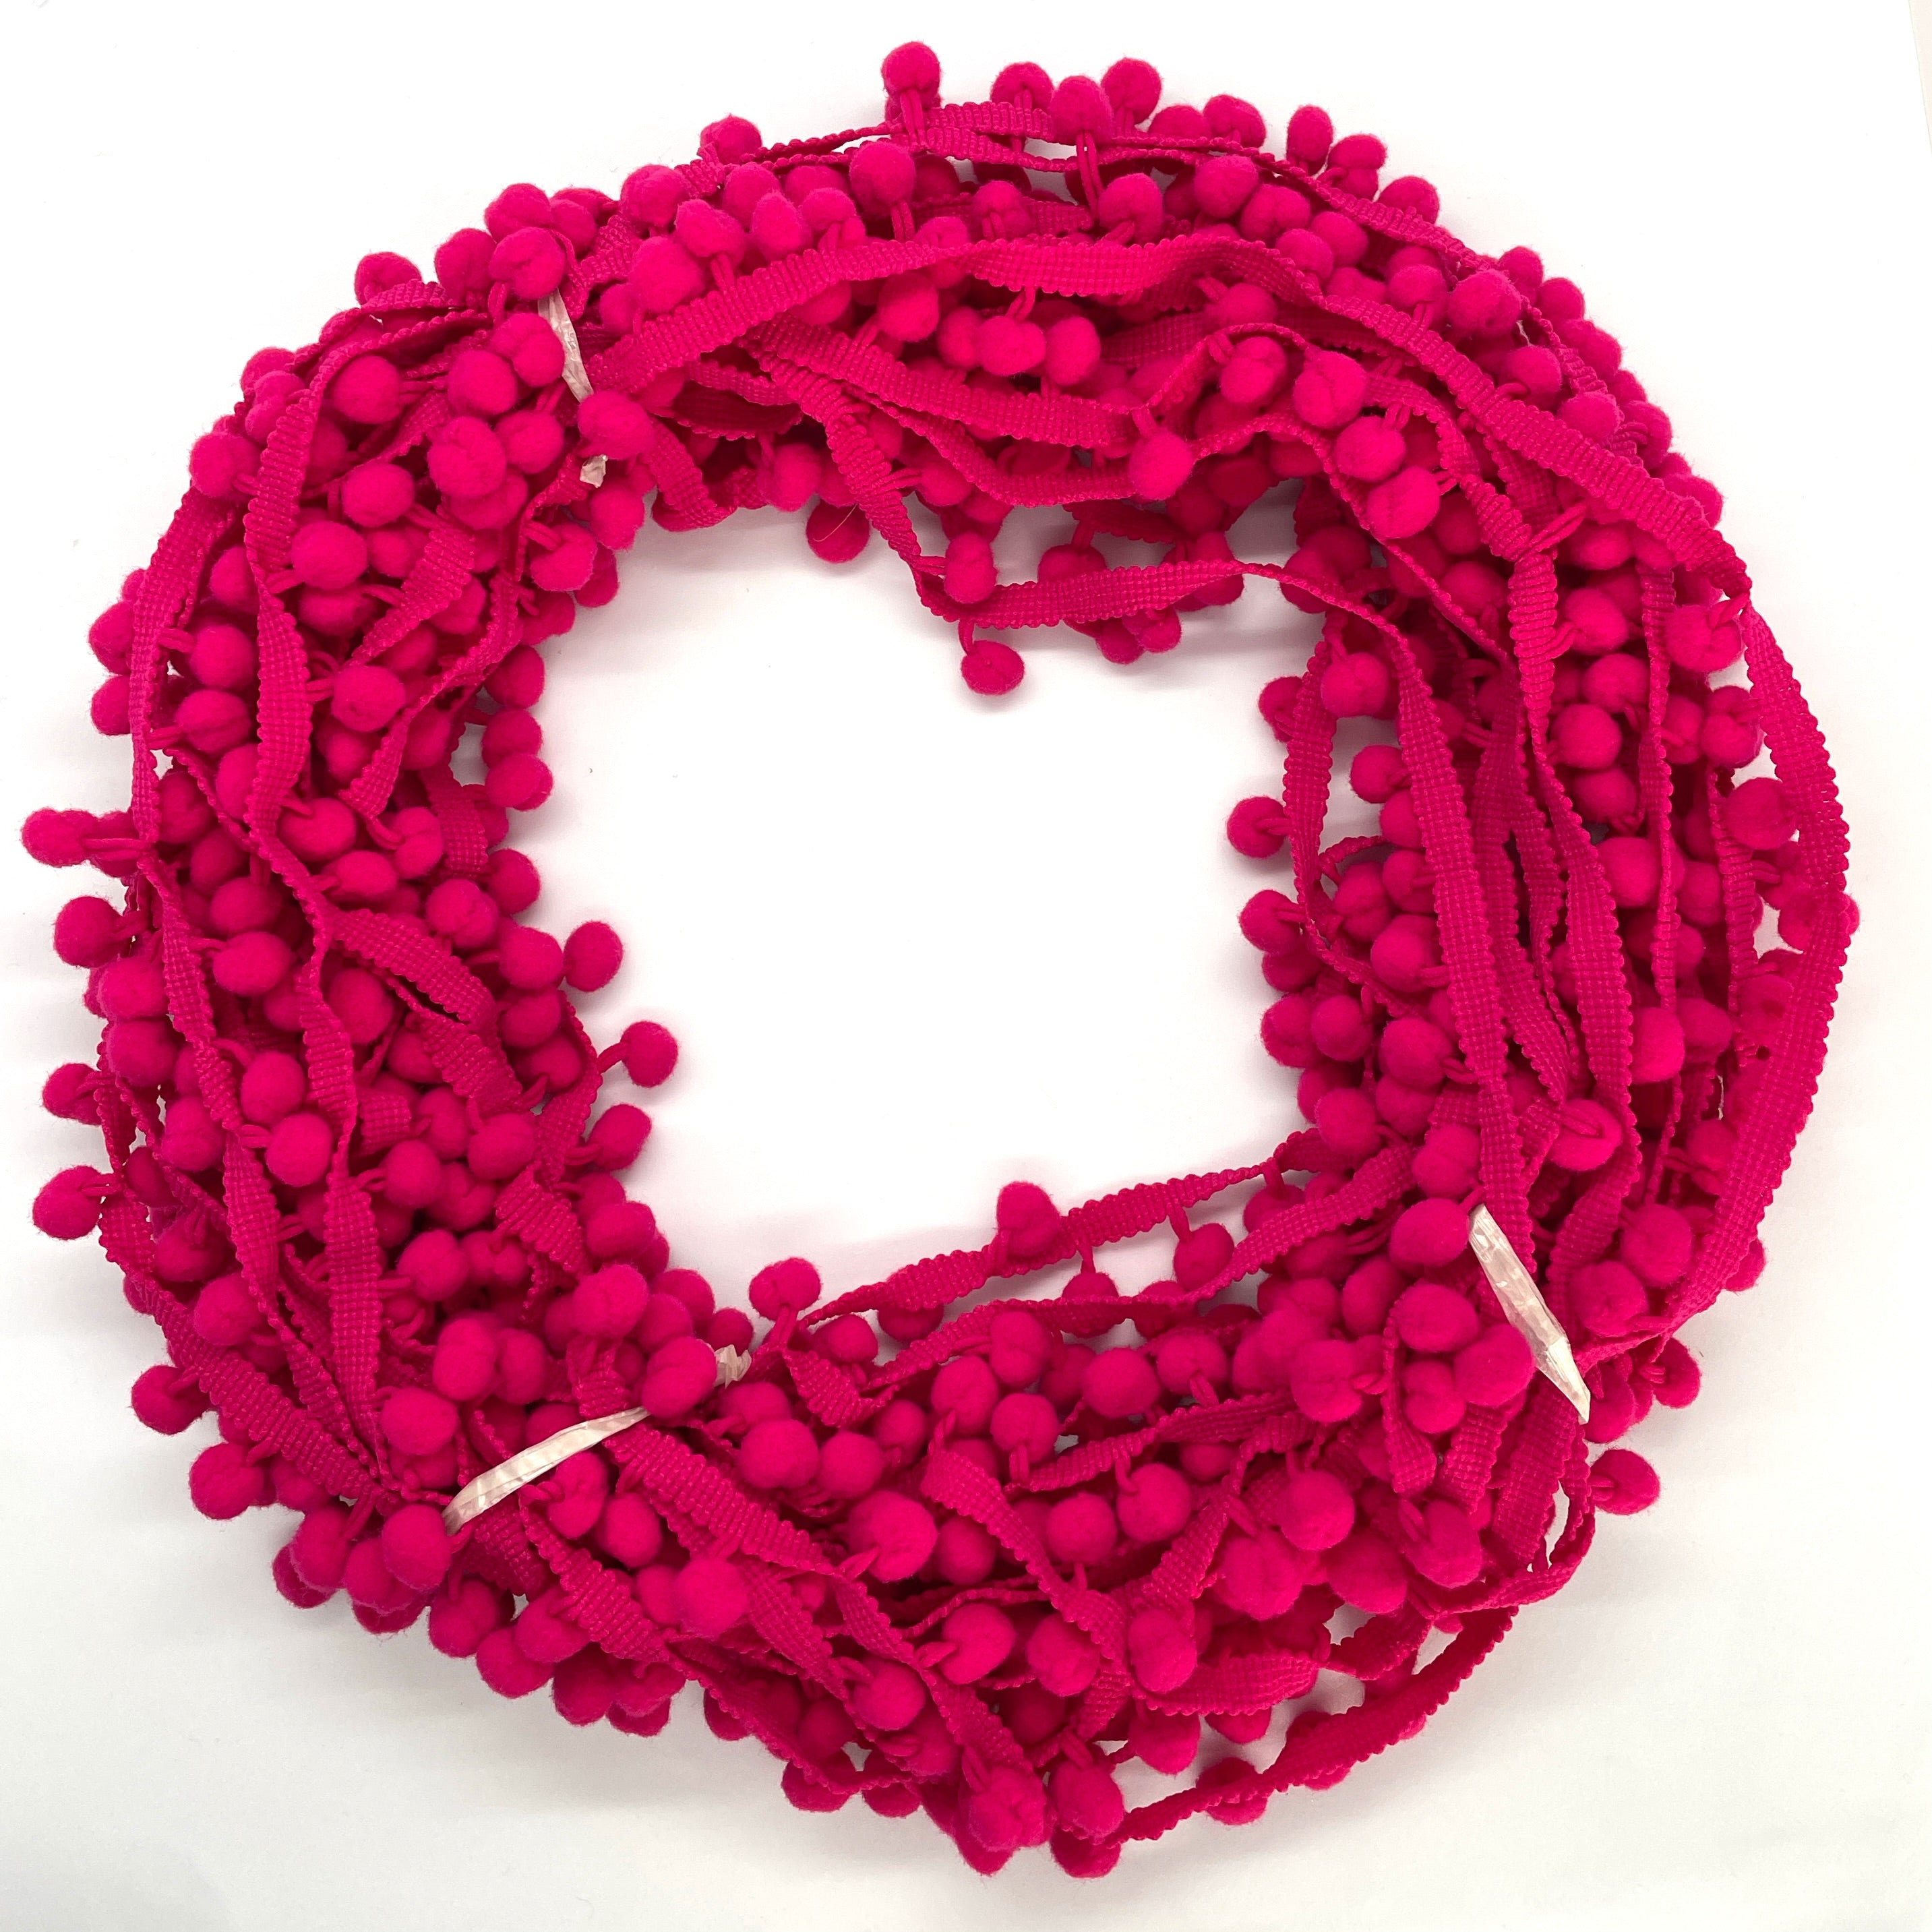 cerise pom pom trim idea for cushions, curtains or anywhere that needs a little extra wow